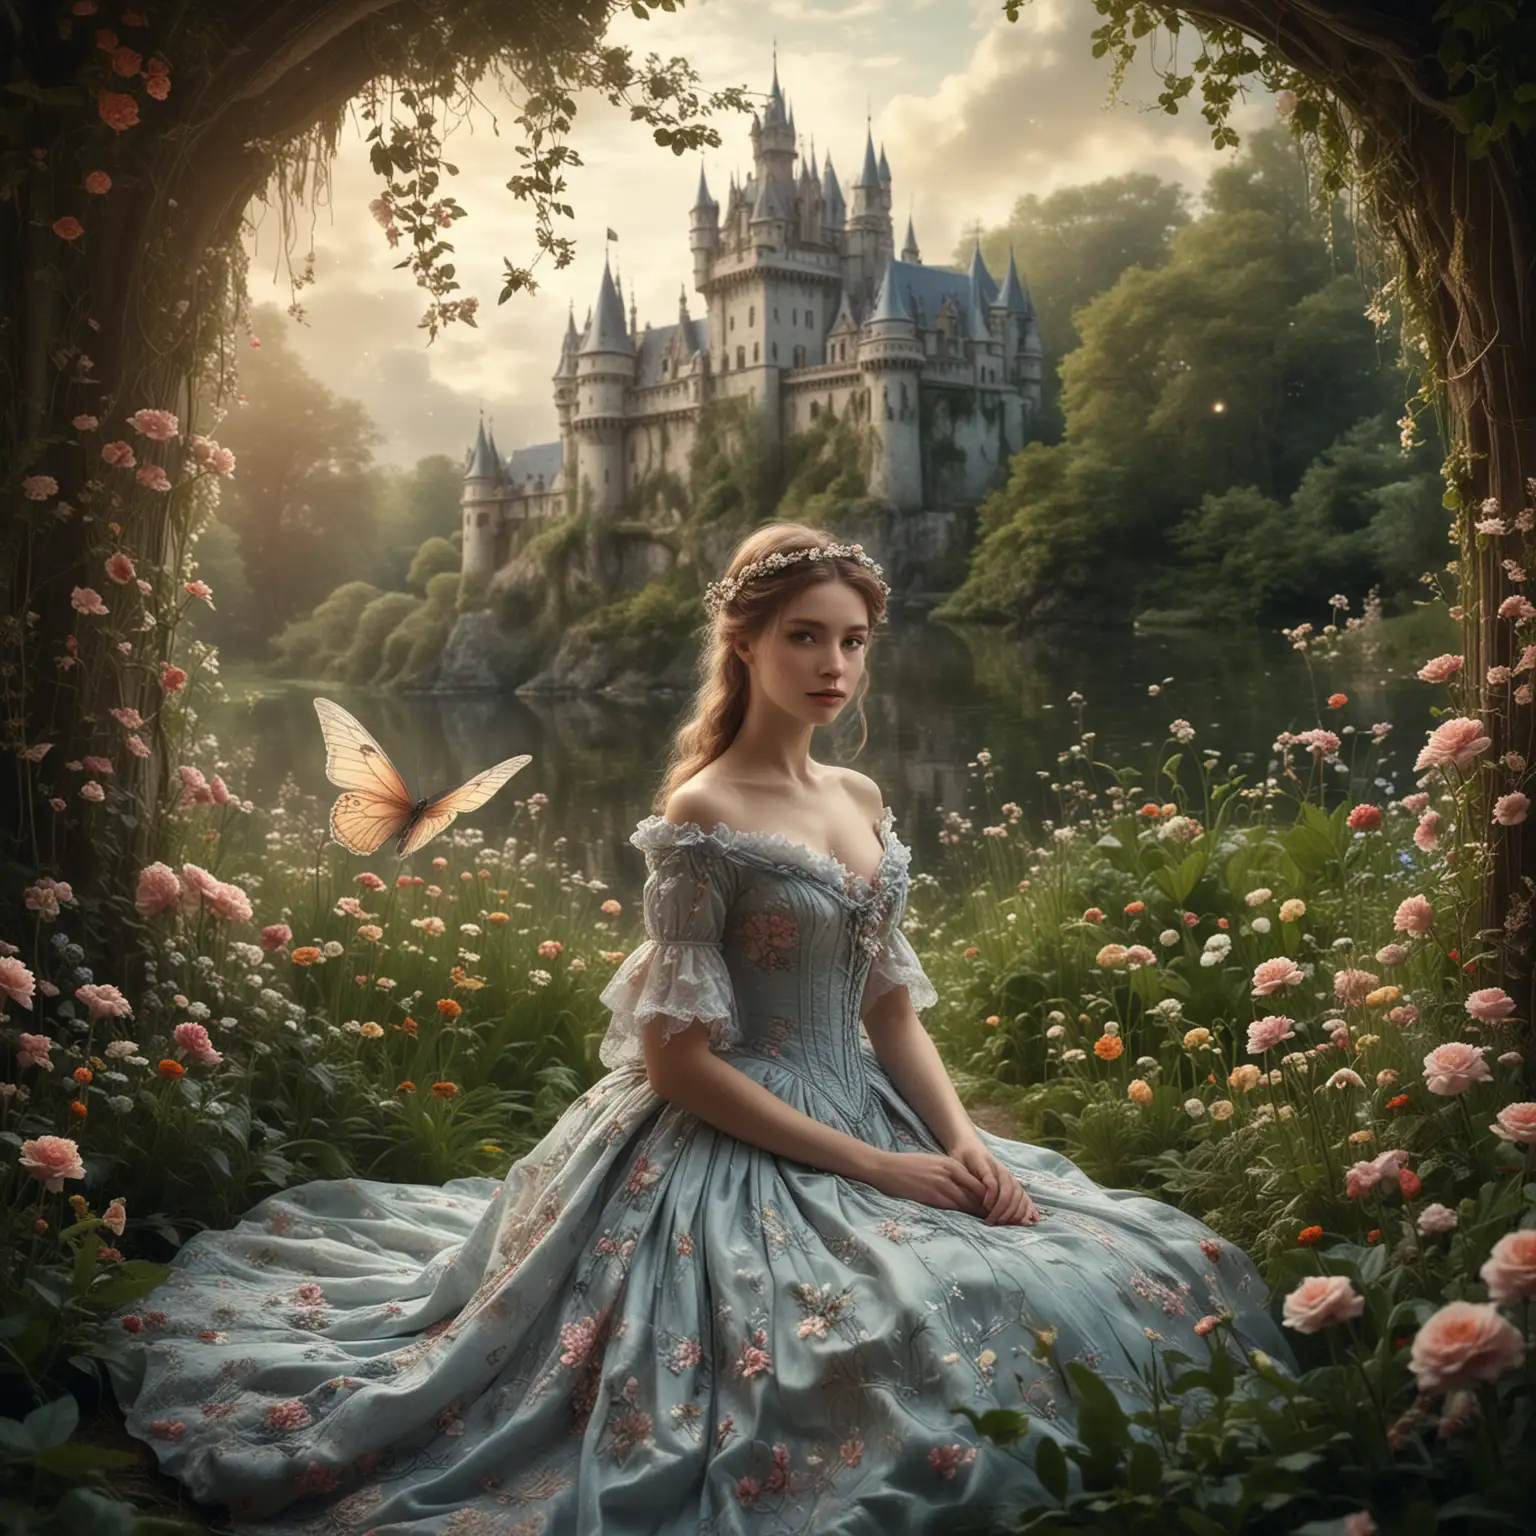 Enchanted Fairy Princess in Victorian Dress Surrounded by Magical Wildlife and Flowers